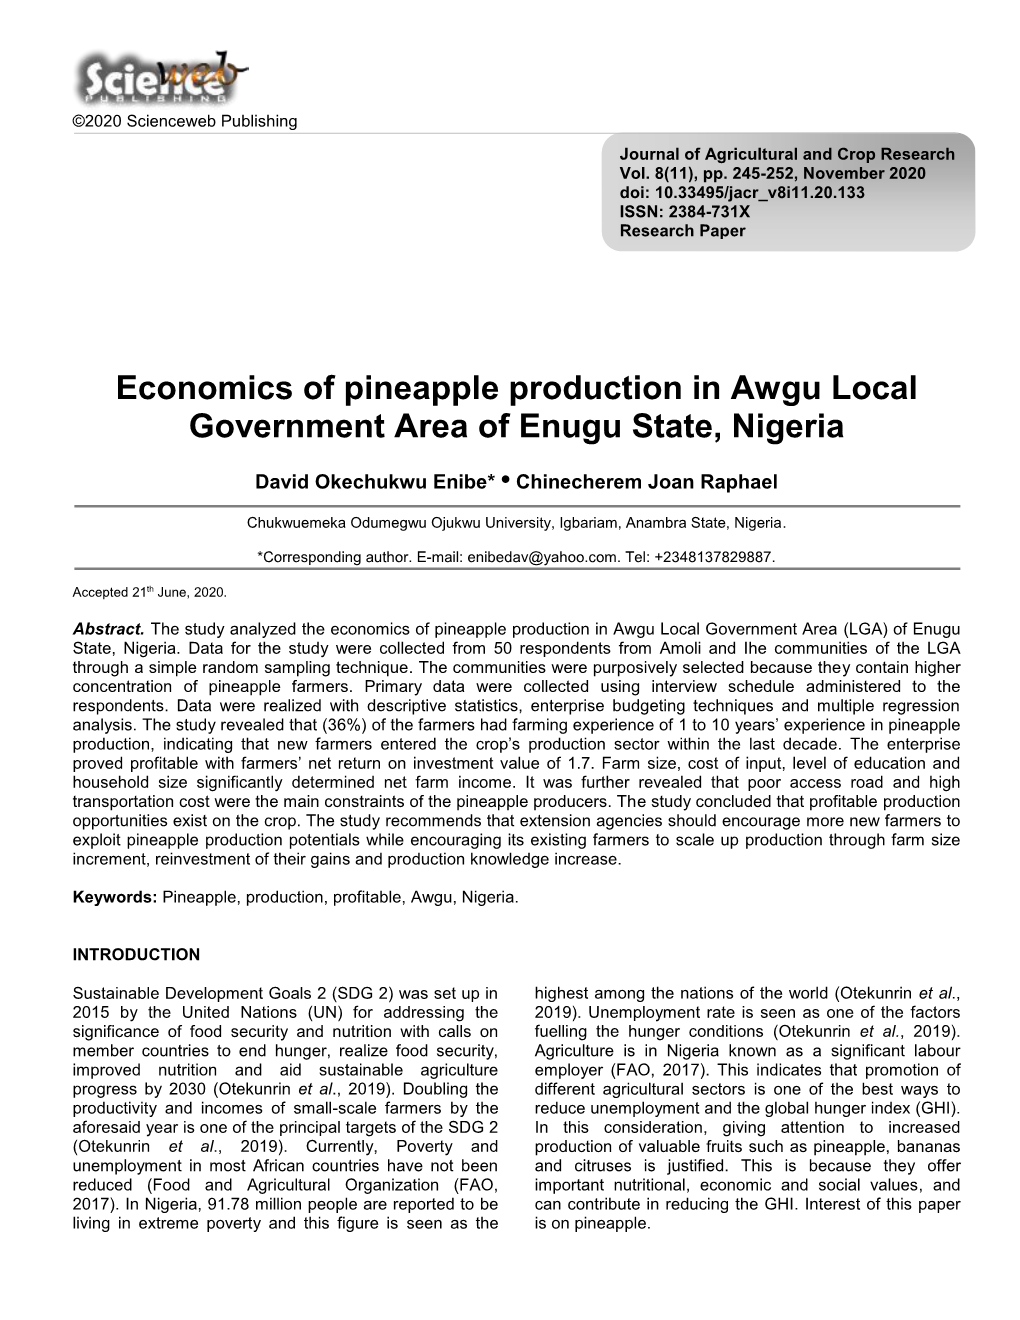 Economics of Pineapple Production in Awgu Local Government Area of Enugu State, Nigeria